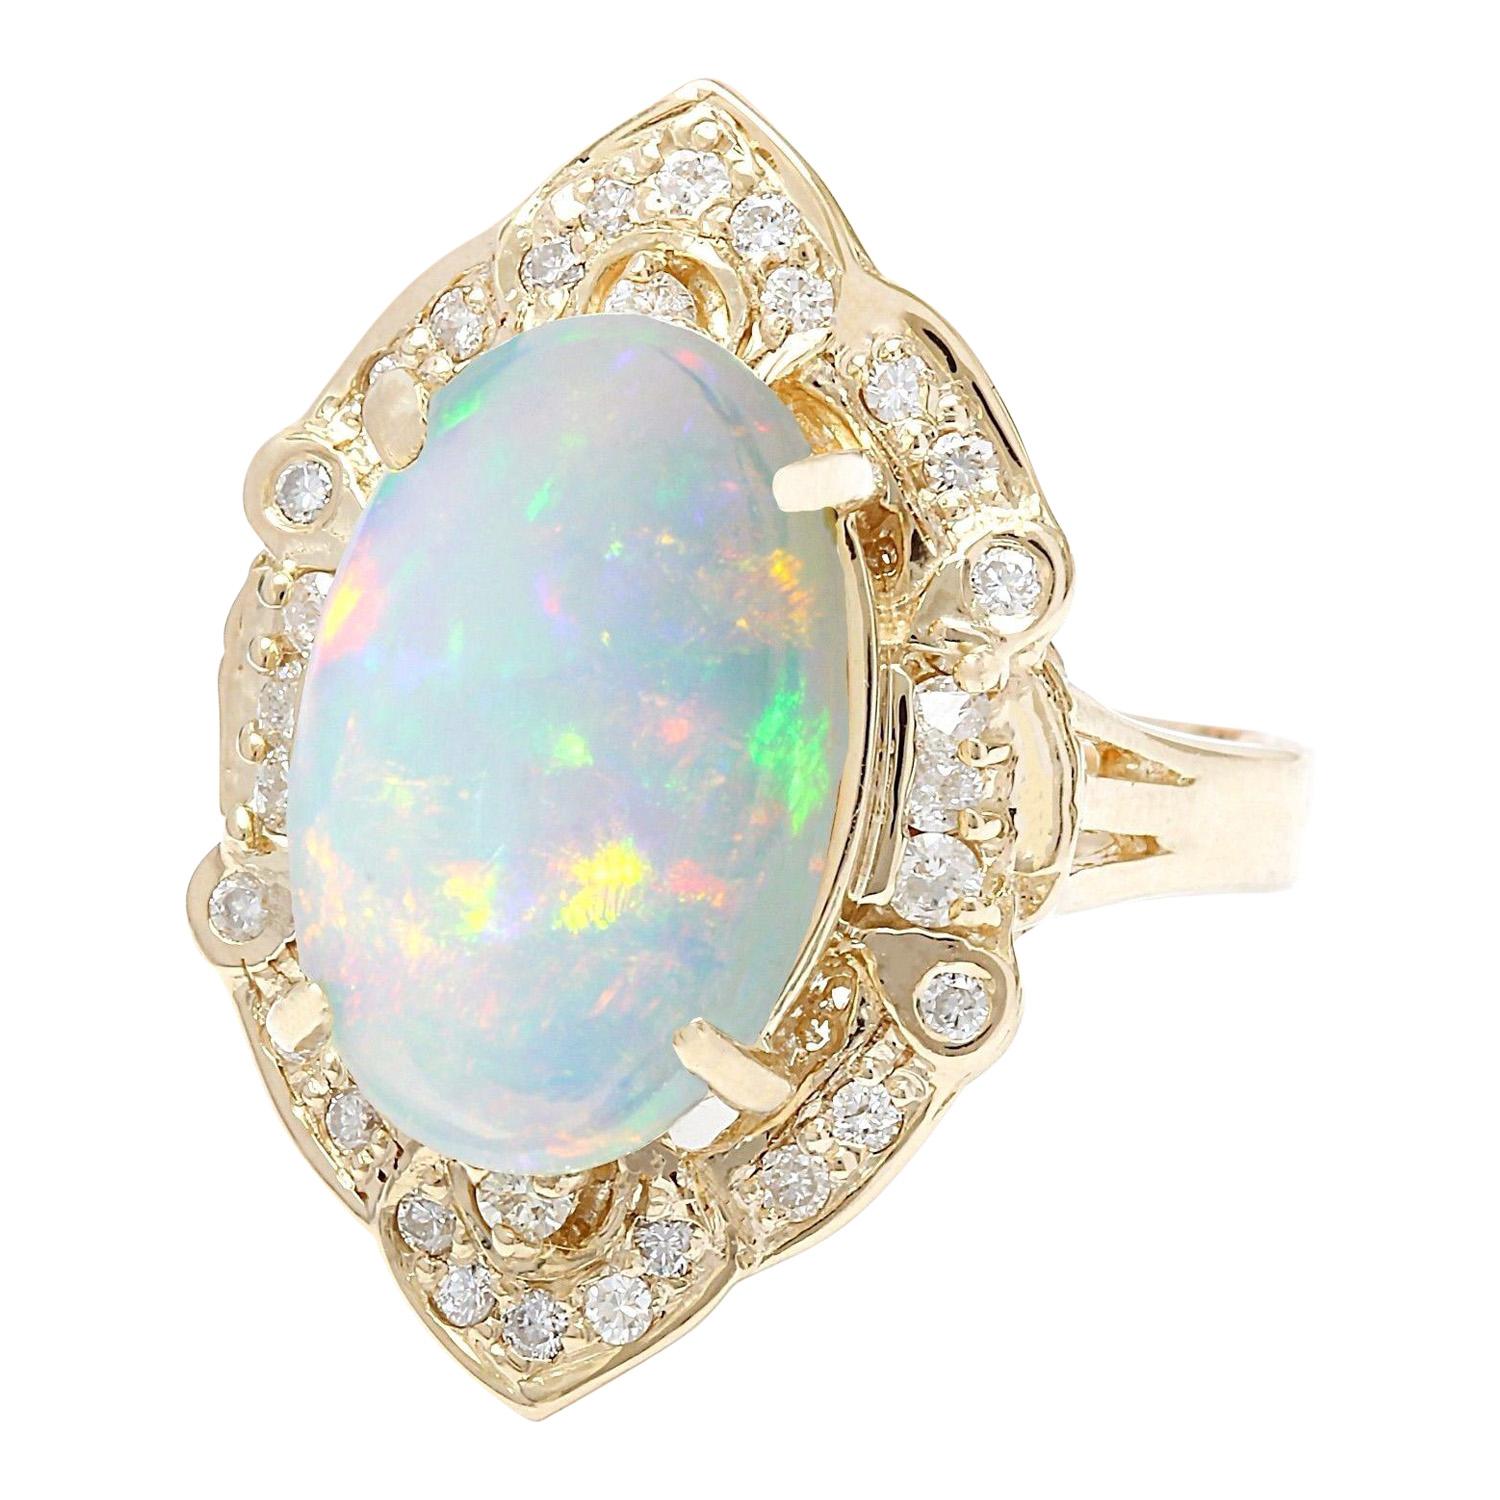 9.05 Carat Natural Opal 14K Solid Yellow Gold Diamond Ring
 Item Type: Ring
 Item Style: Cocktail
 Material: 14K Yellow Gold
 Mainstone: Opal
 Stone Color: Multicolor
 Stone Weight: 8.25 Carat
 Stone Shape: Oval
 Stone Quantity: 1
 Stone Dimensions: